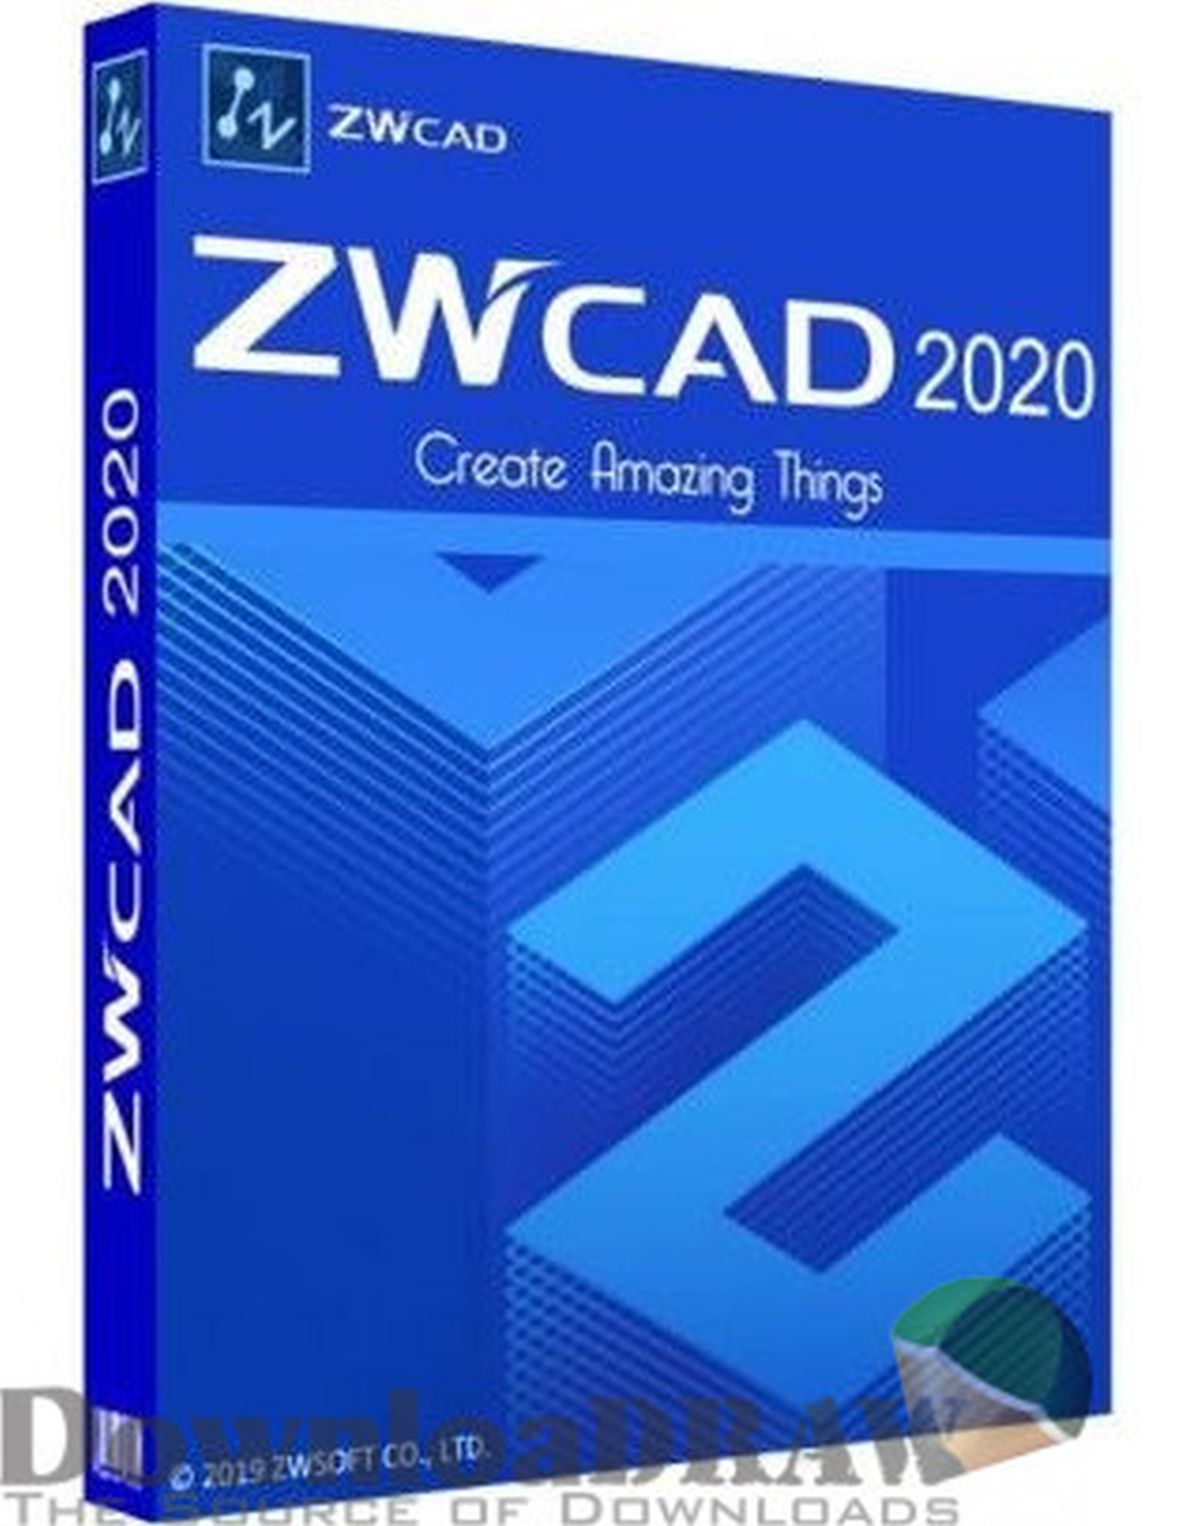 ZWCAD 2020 Professional 3D Software